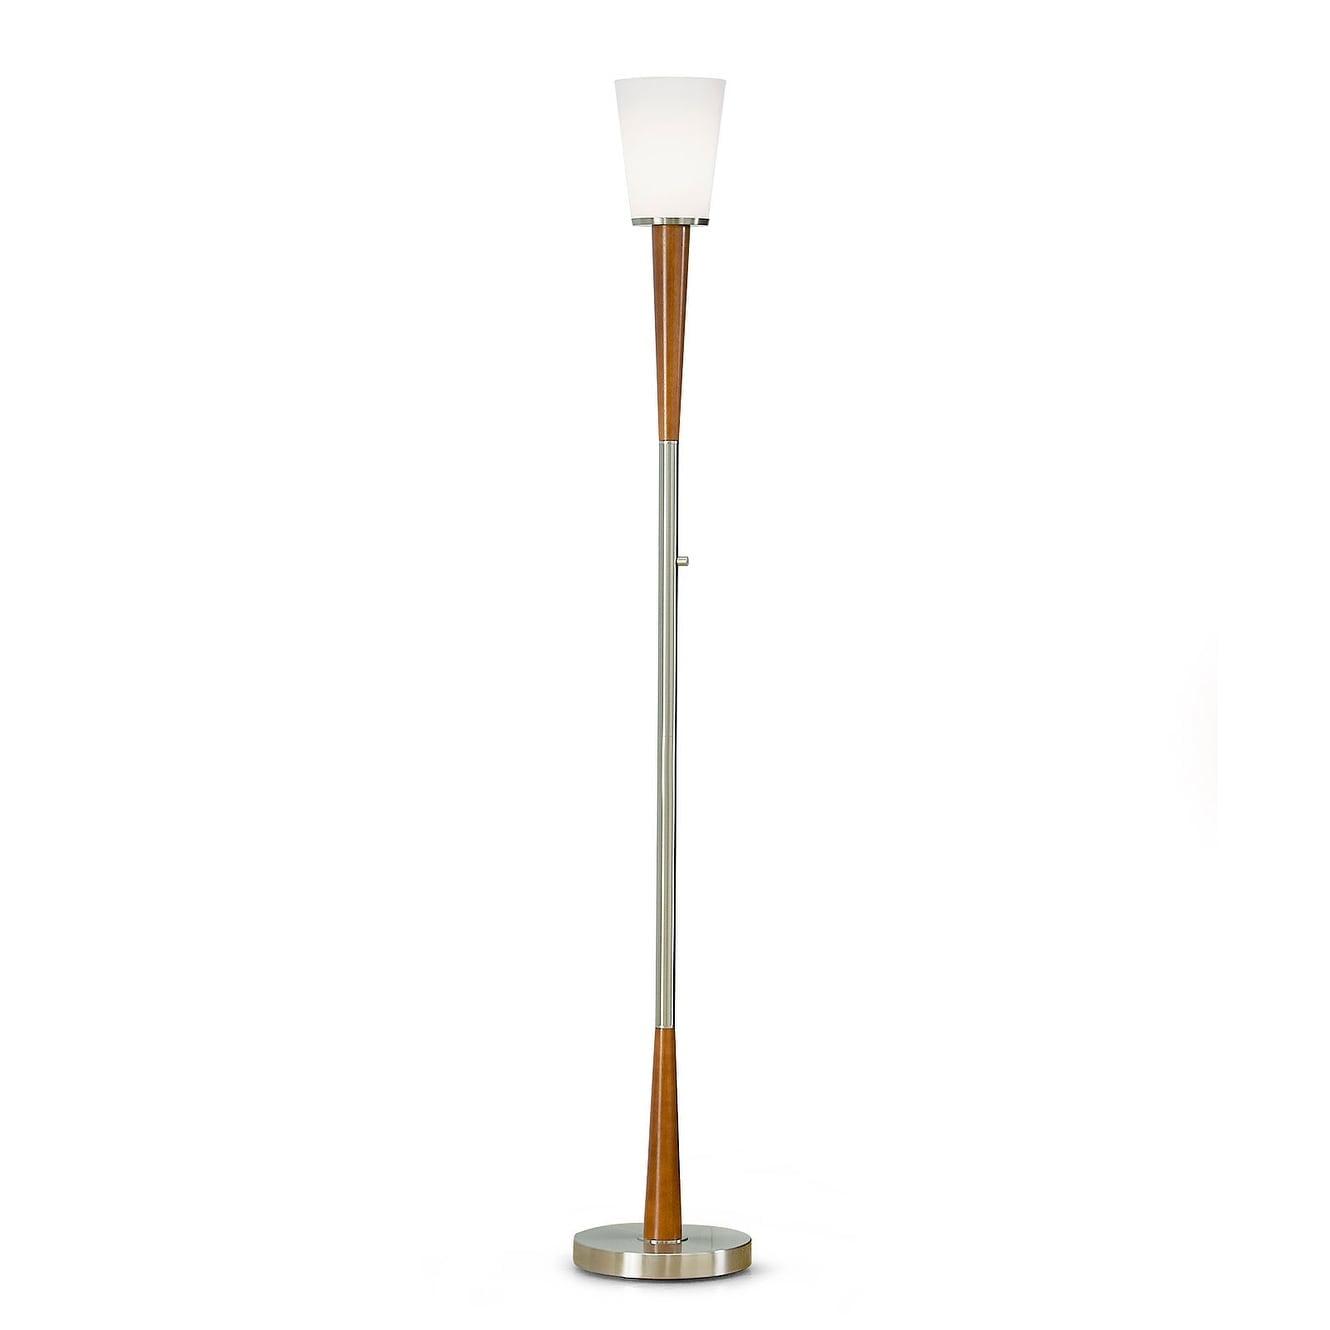 Century 72" Brushed Nickel Wood Torchiere Floor Lamp with Dimmer